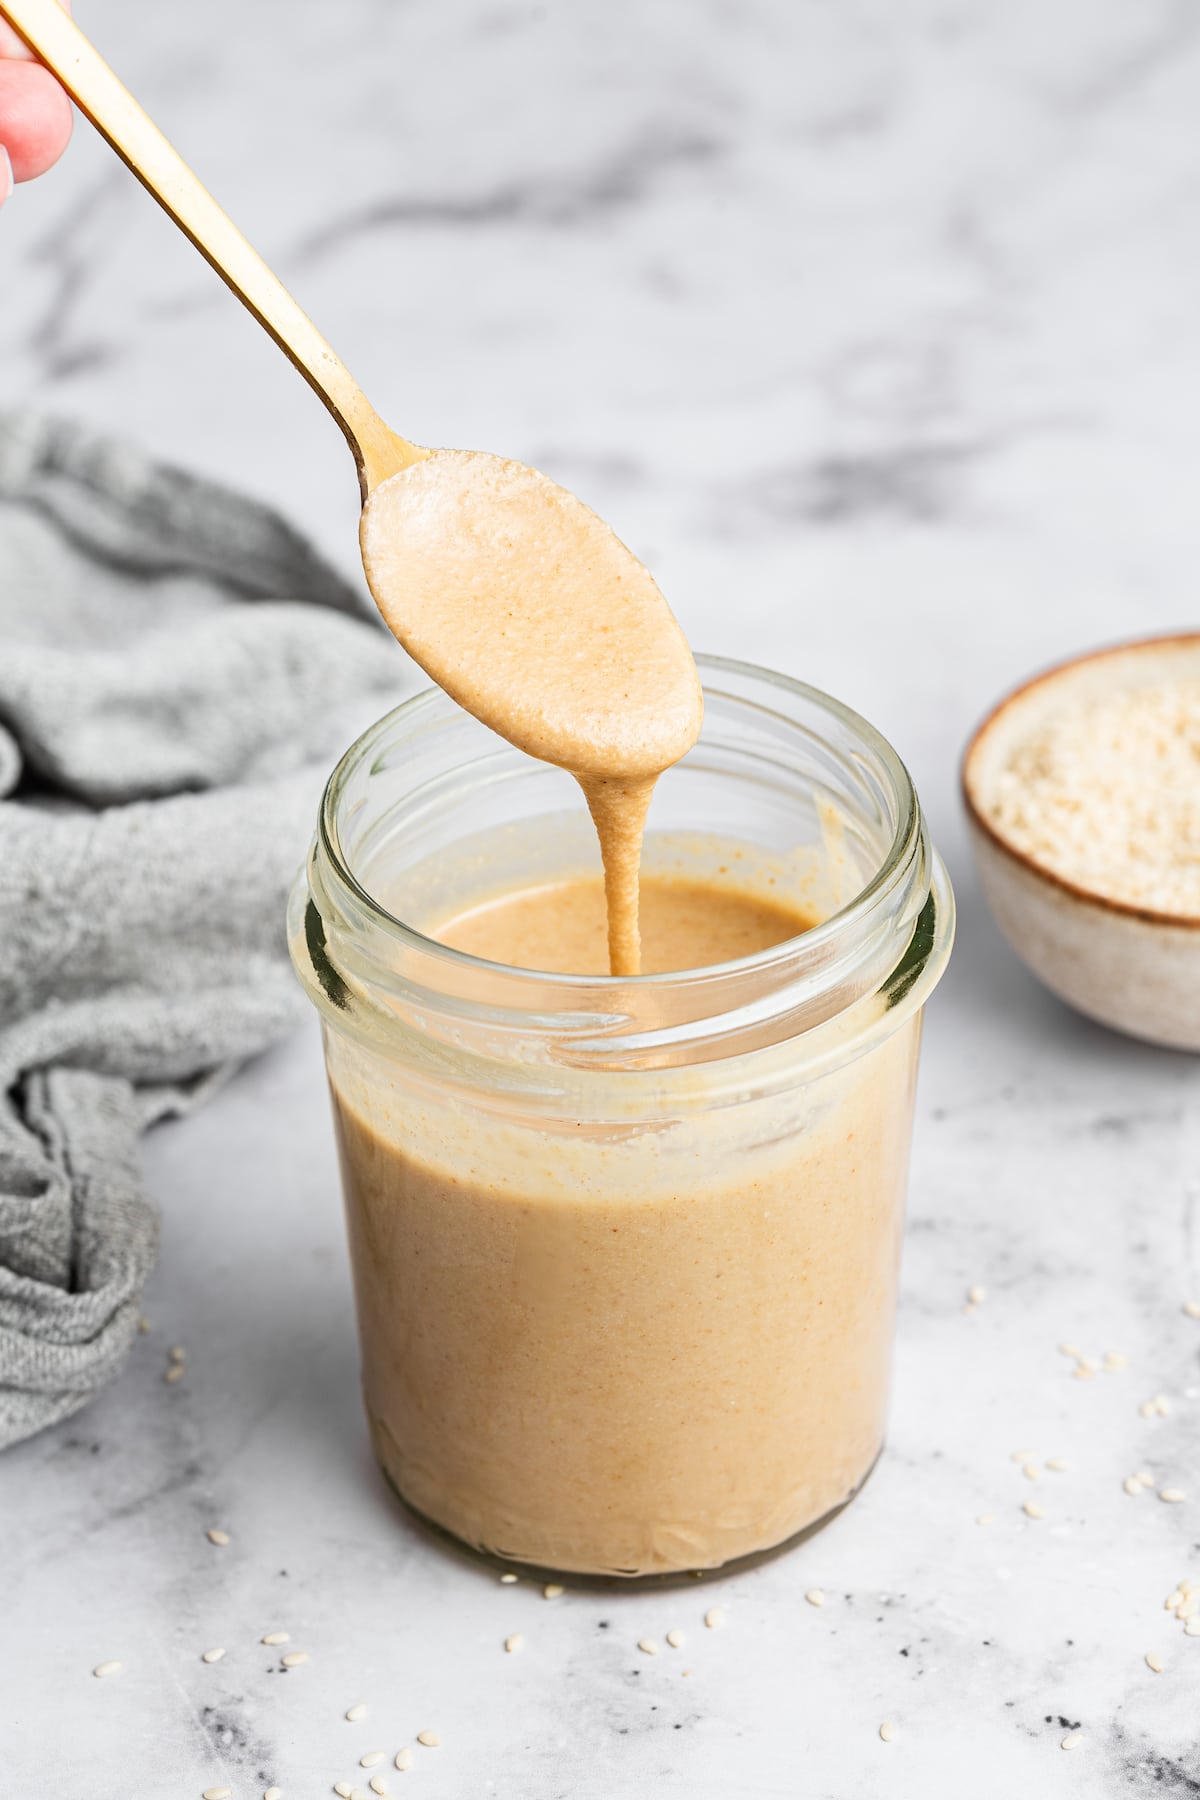 A hand holding a metal spoon with tahini over a glass jar full of tahini.